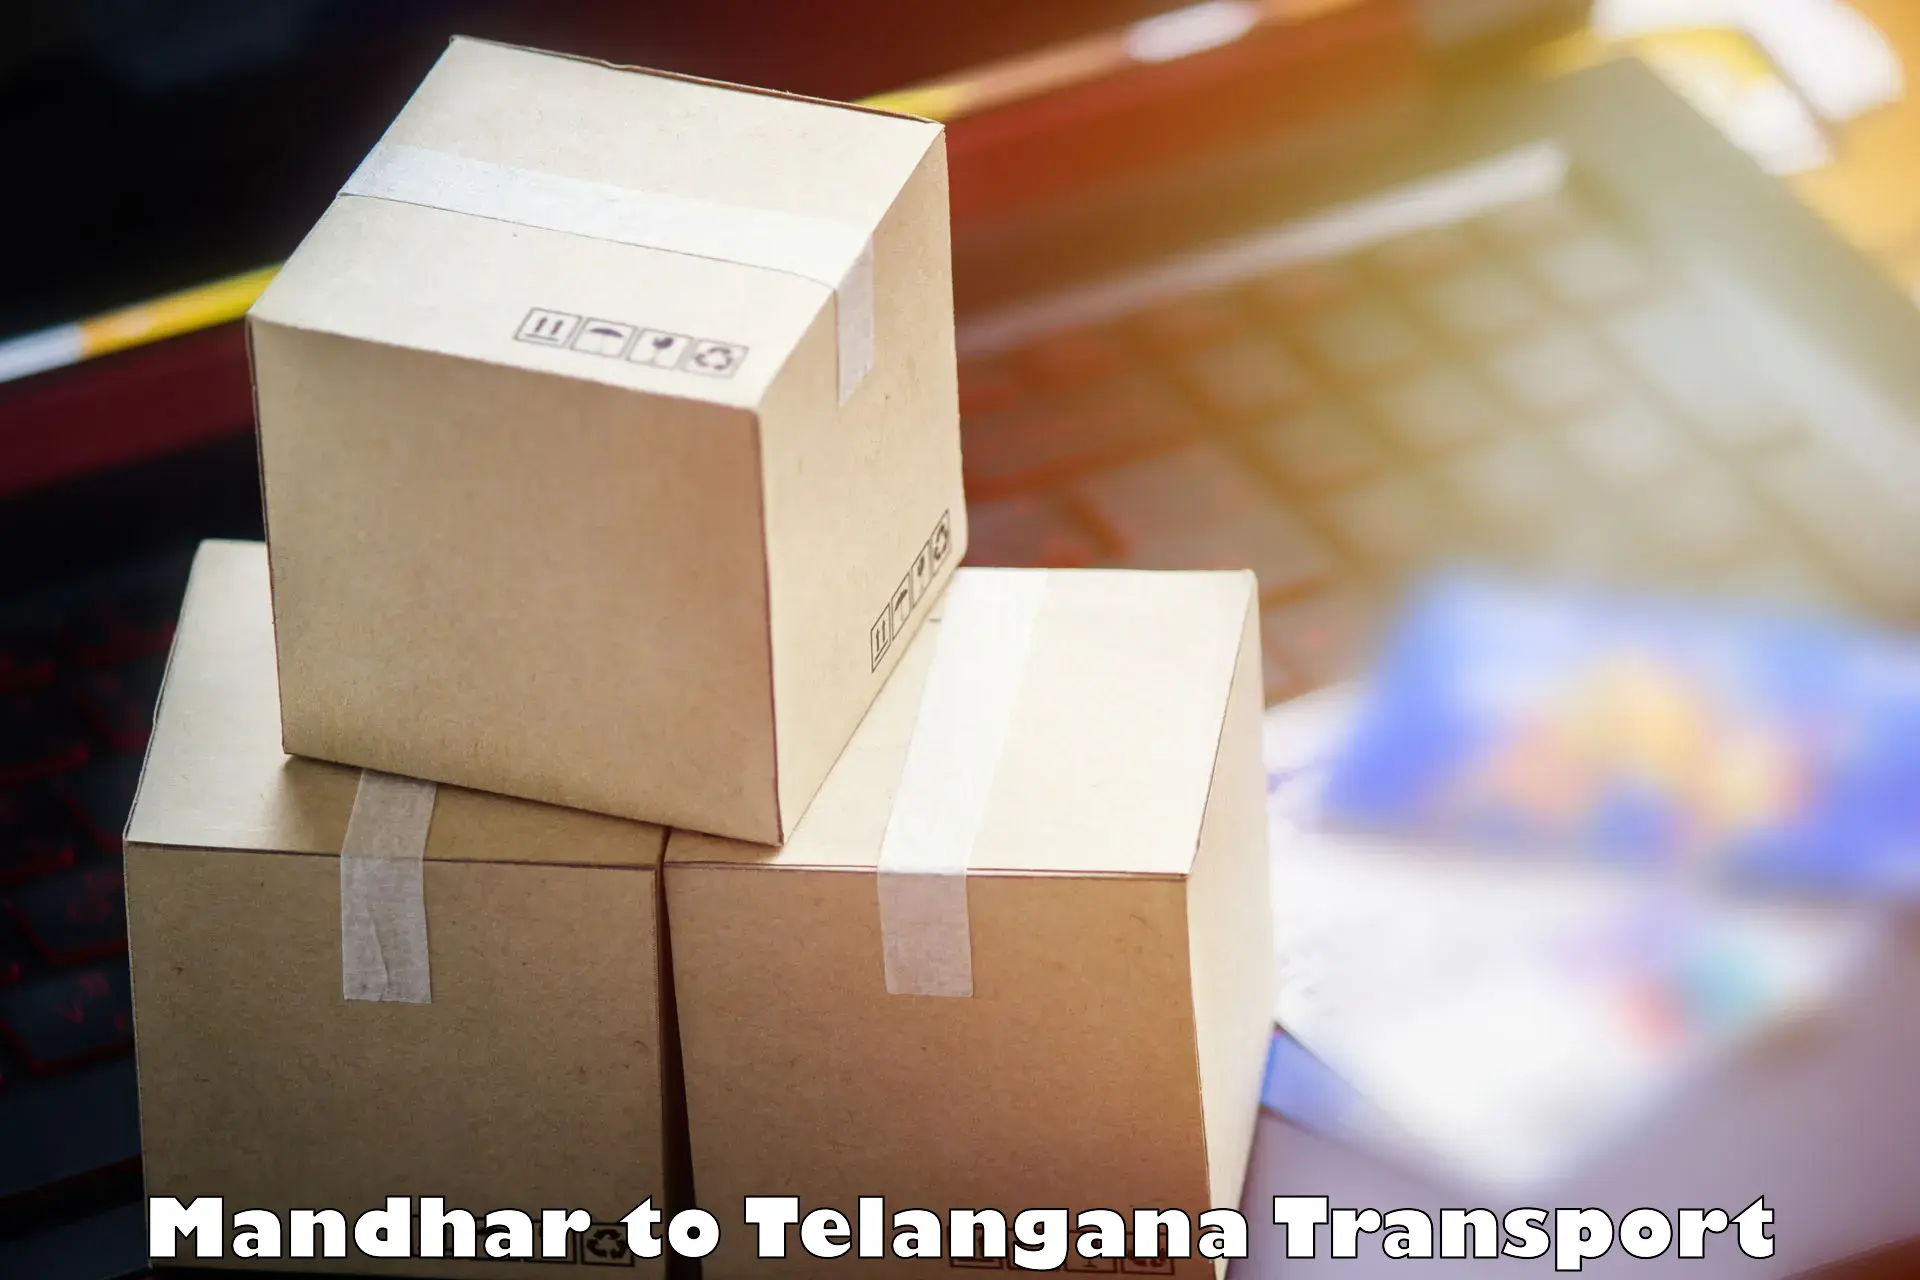 Container transportation services Mandhar to Secunderabad